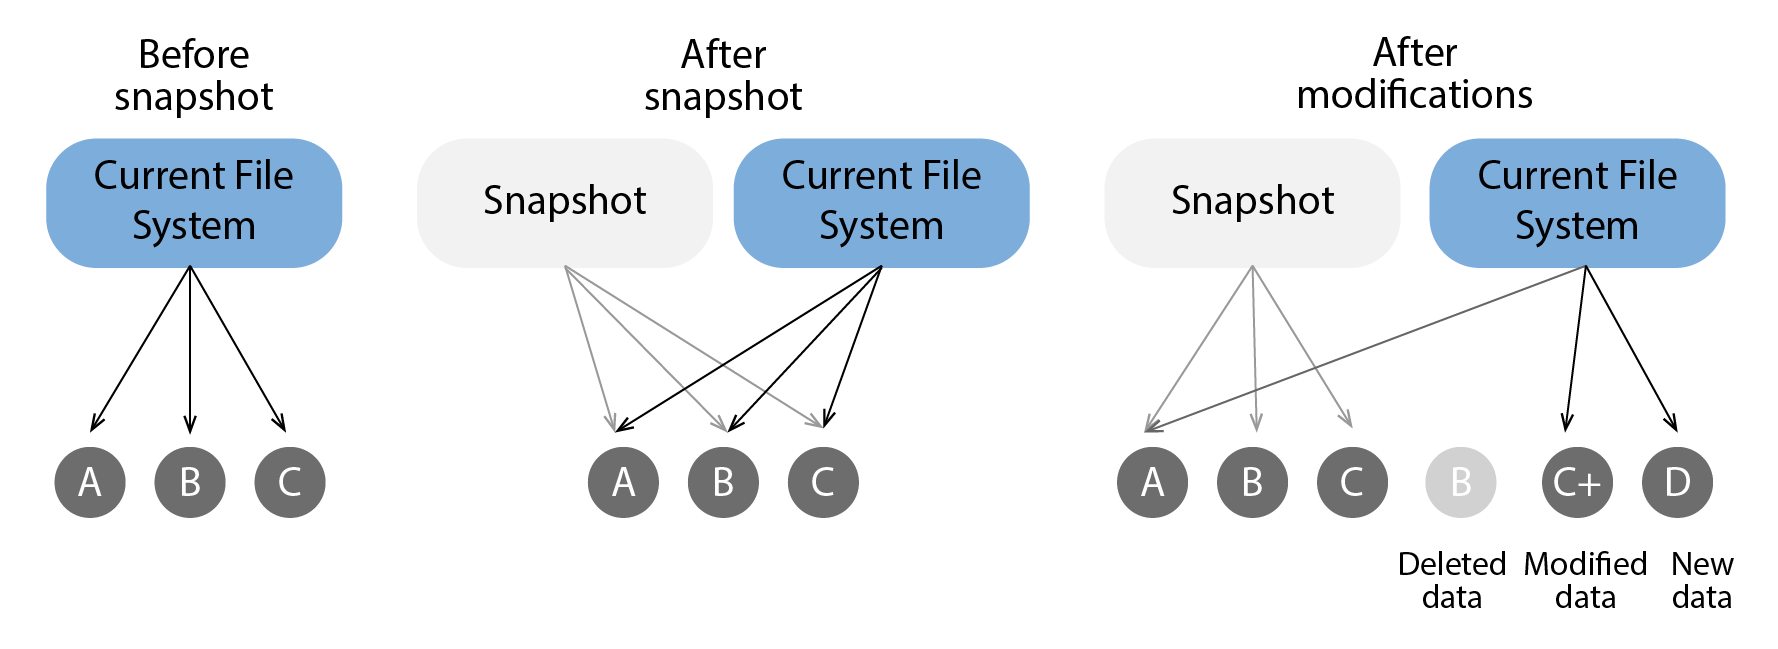 Snapshot generation by P5 Synchronize to retain file system information